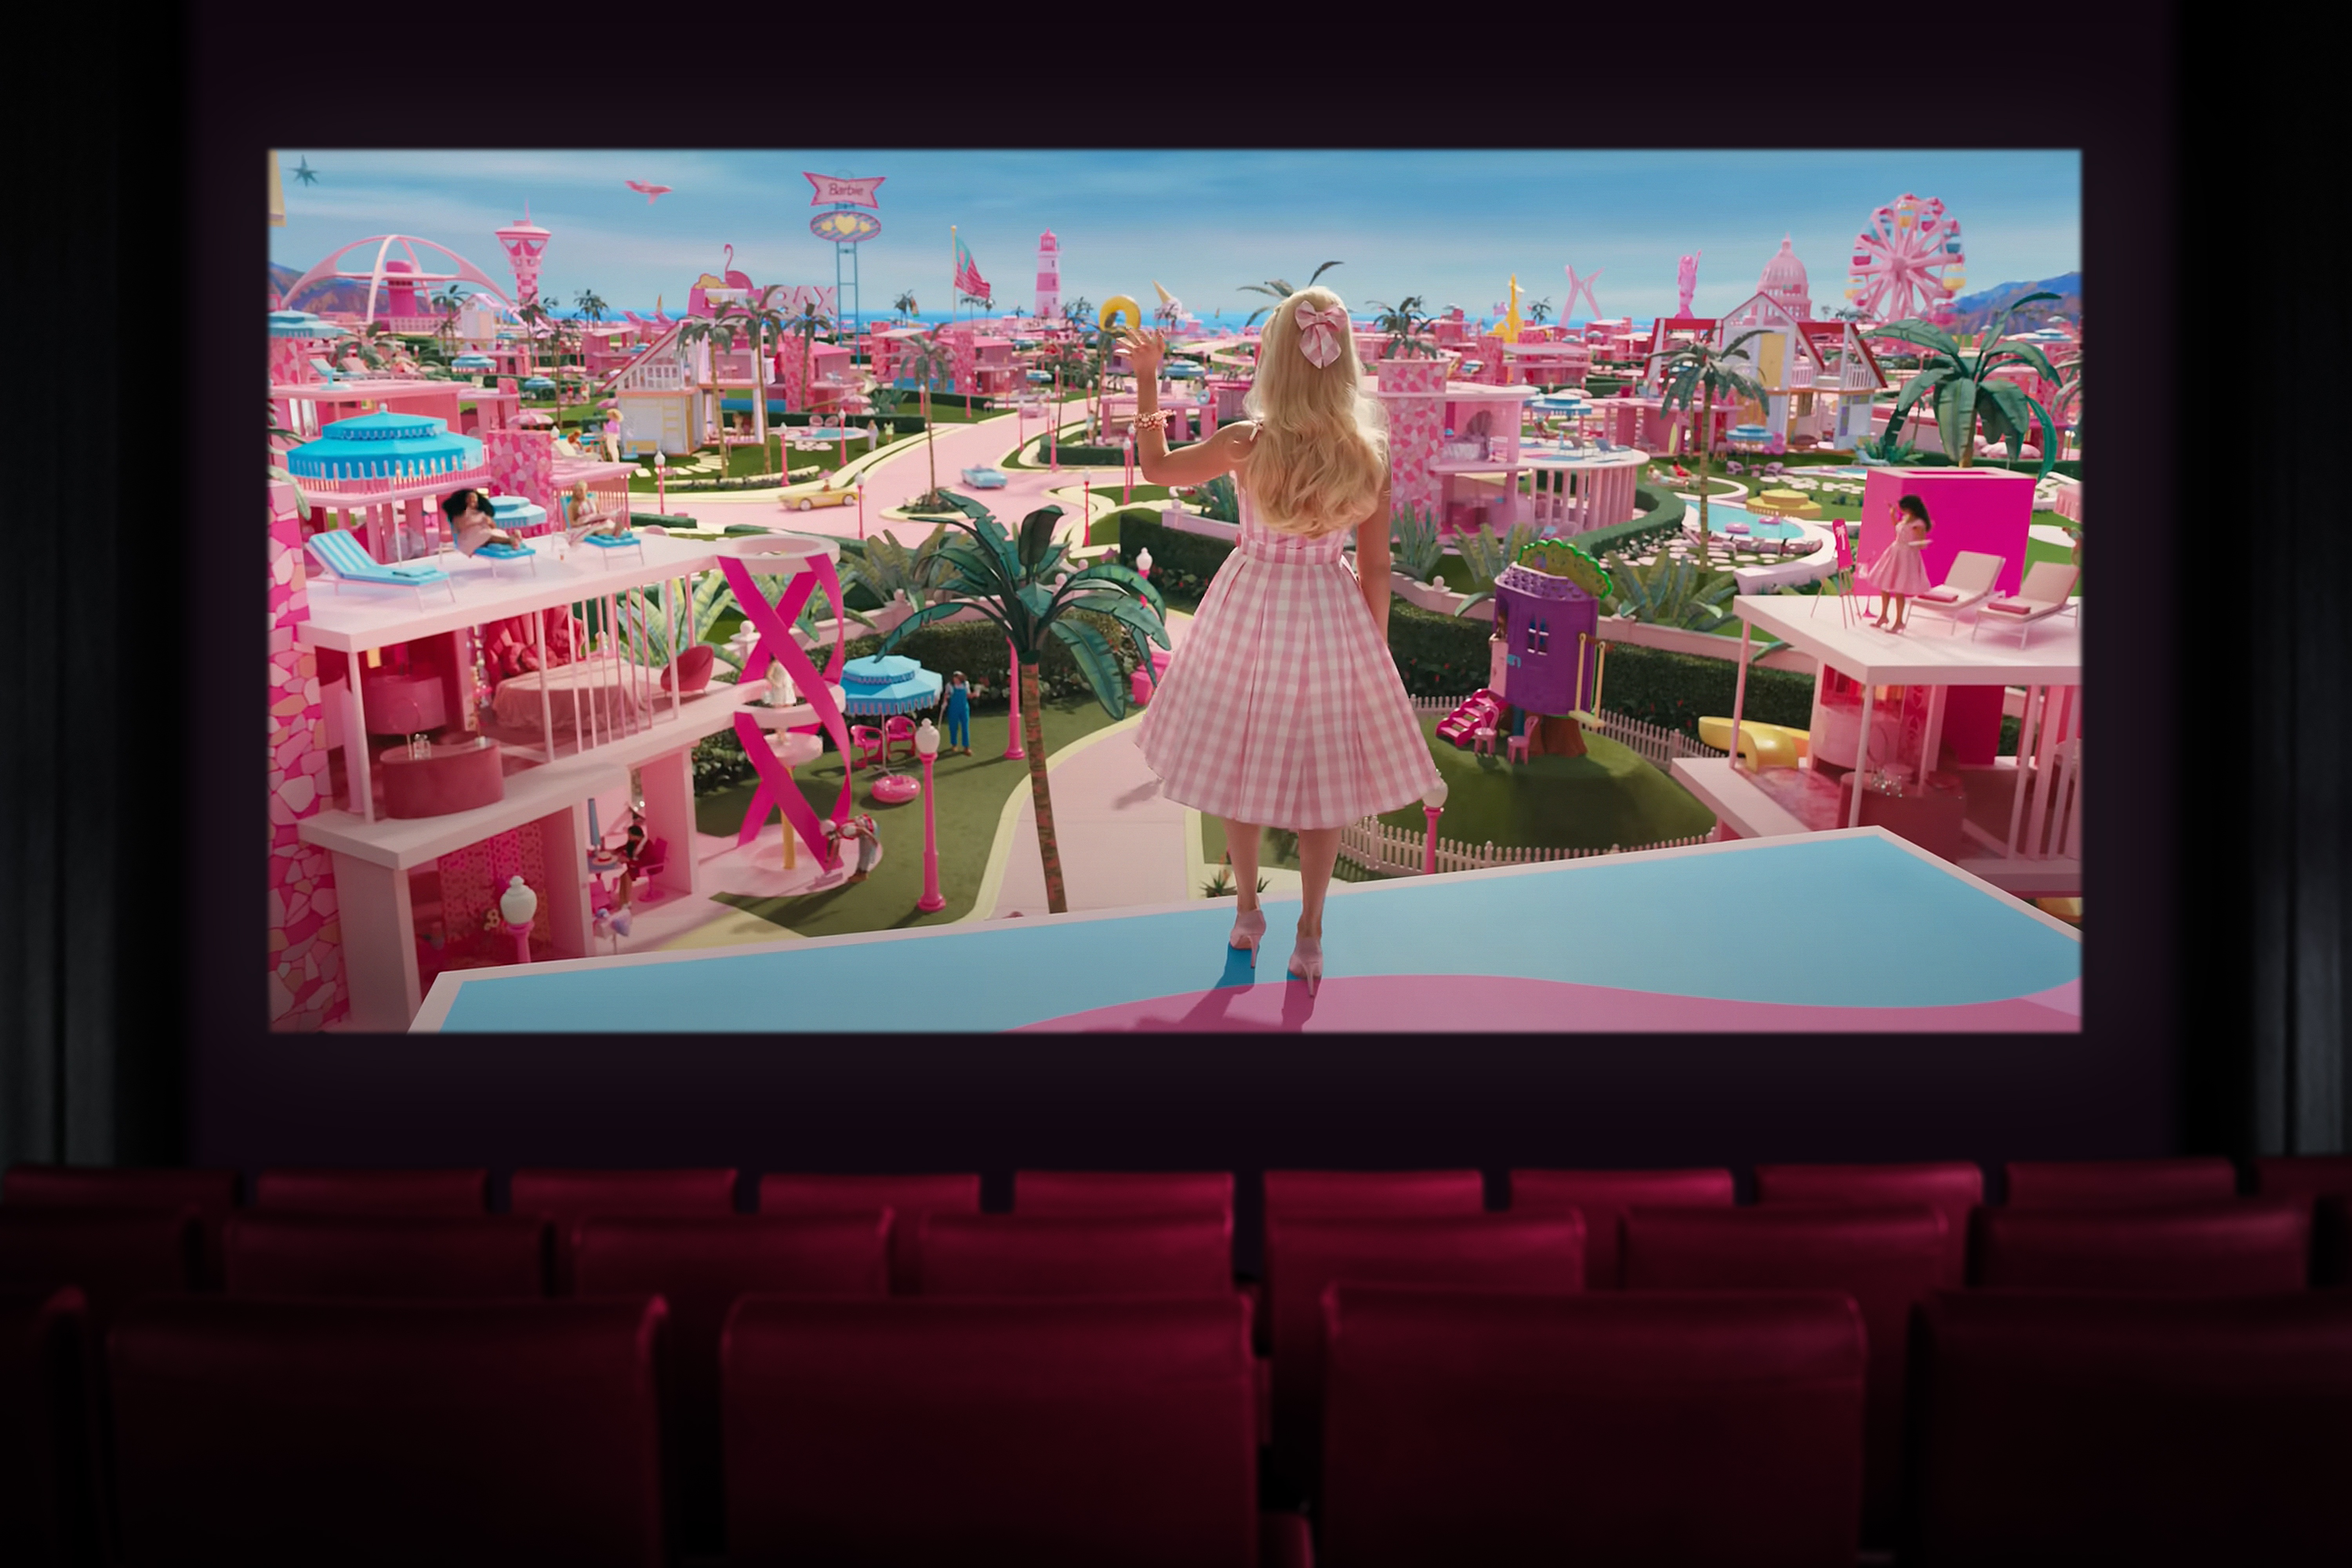 cinema seats in front of a screen showing the Barbie movie. In it, Barbie is stood on top of a building, waving at other Barbies.